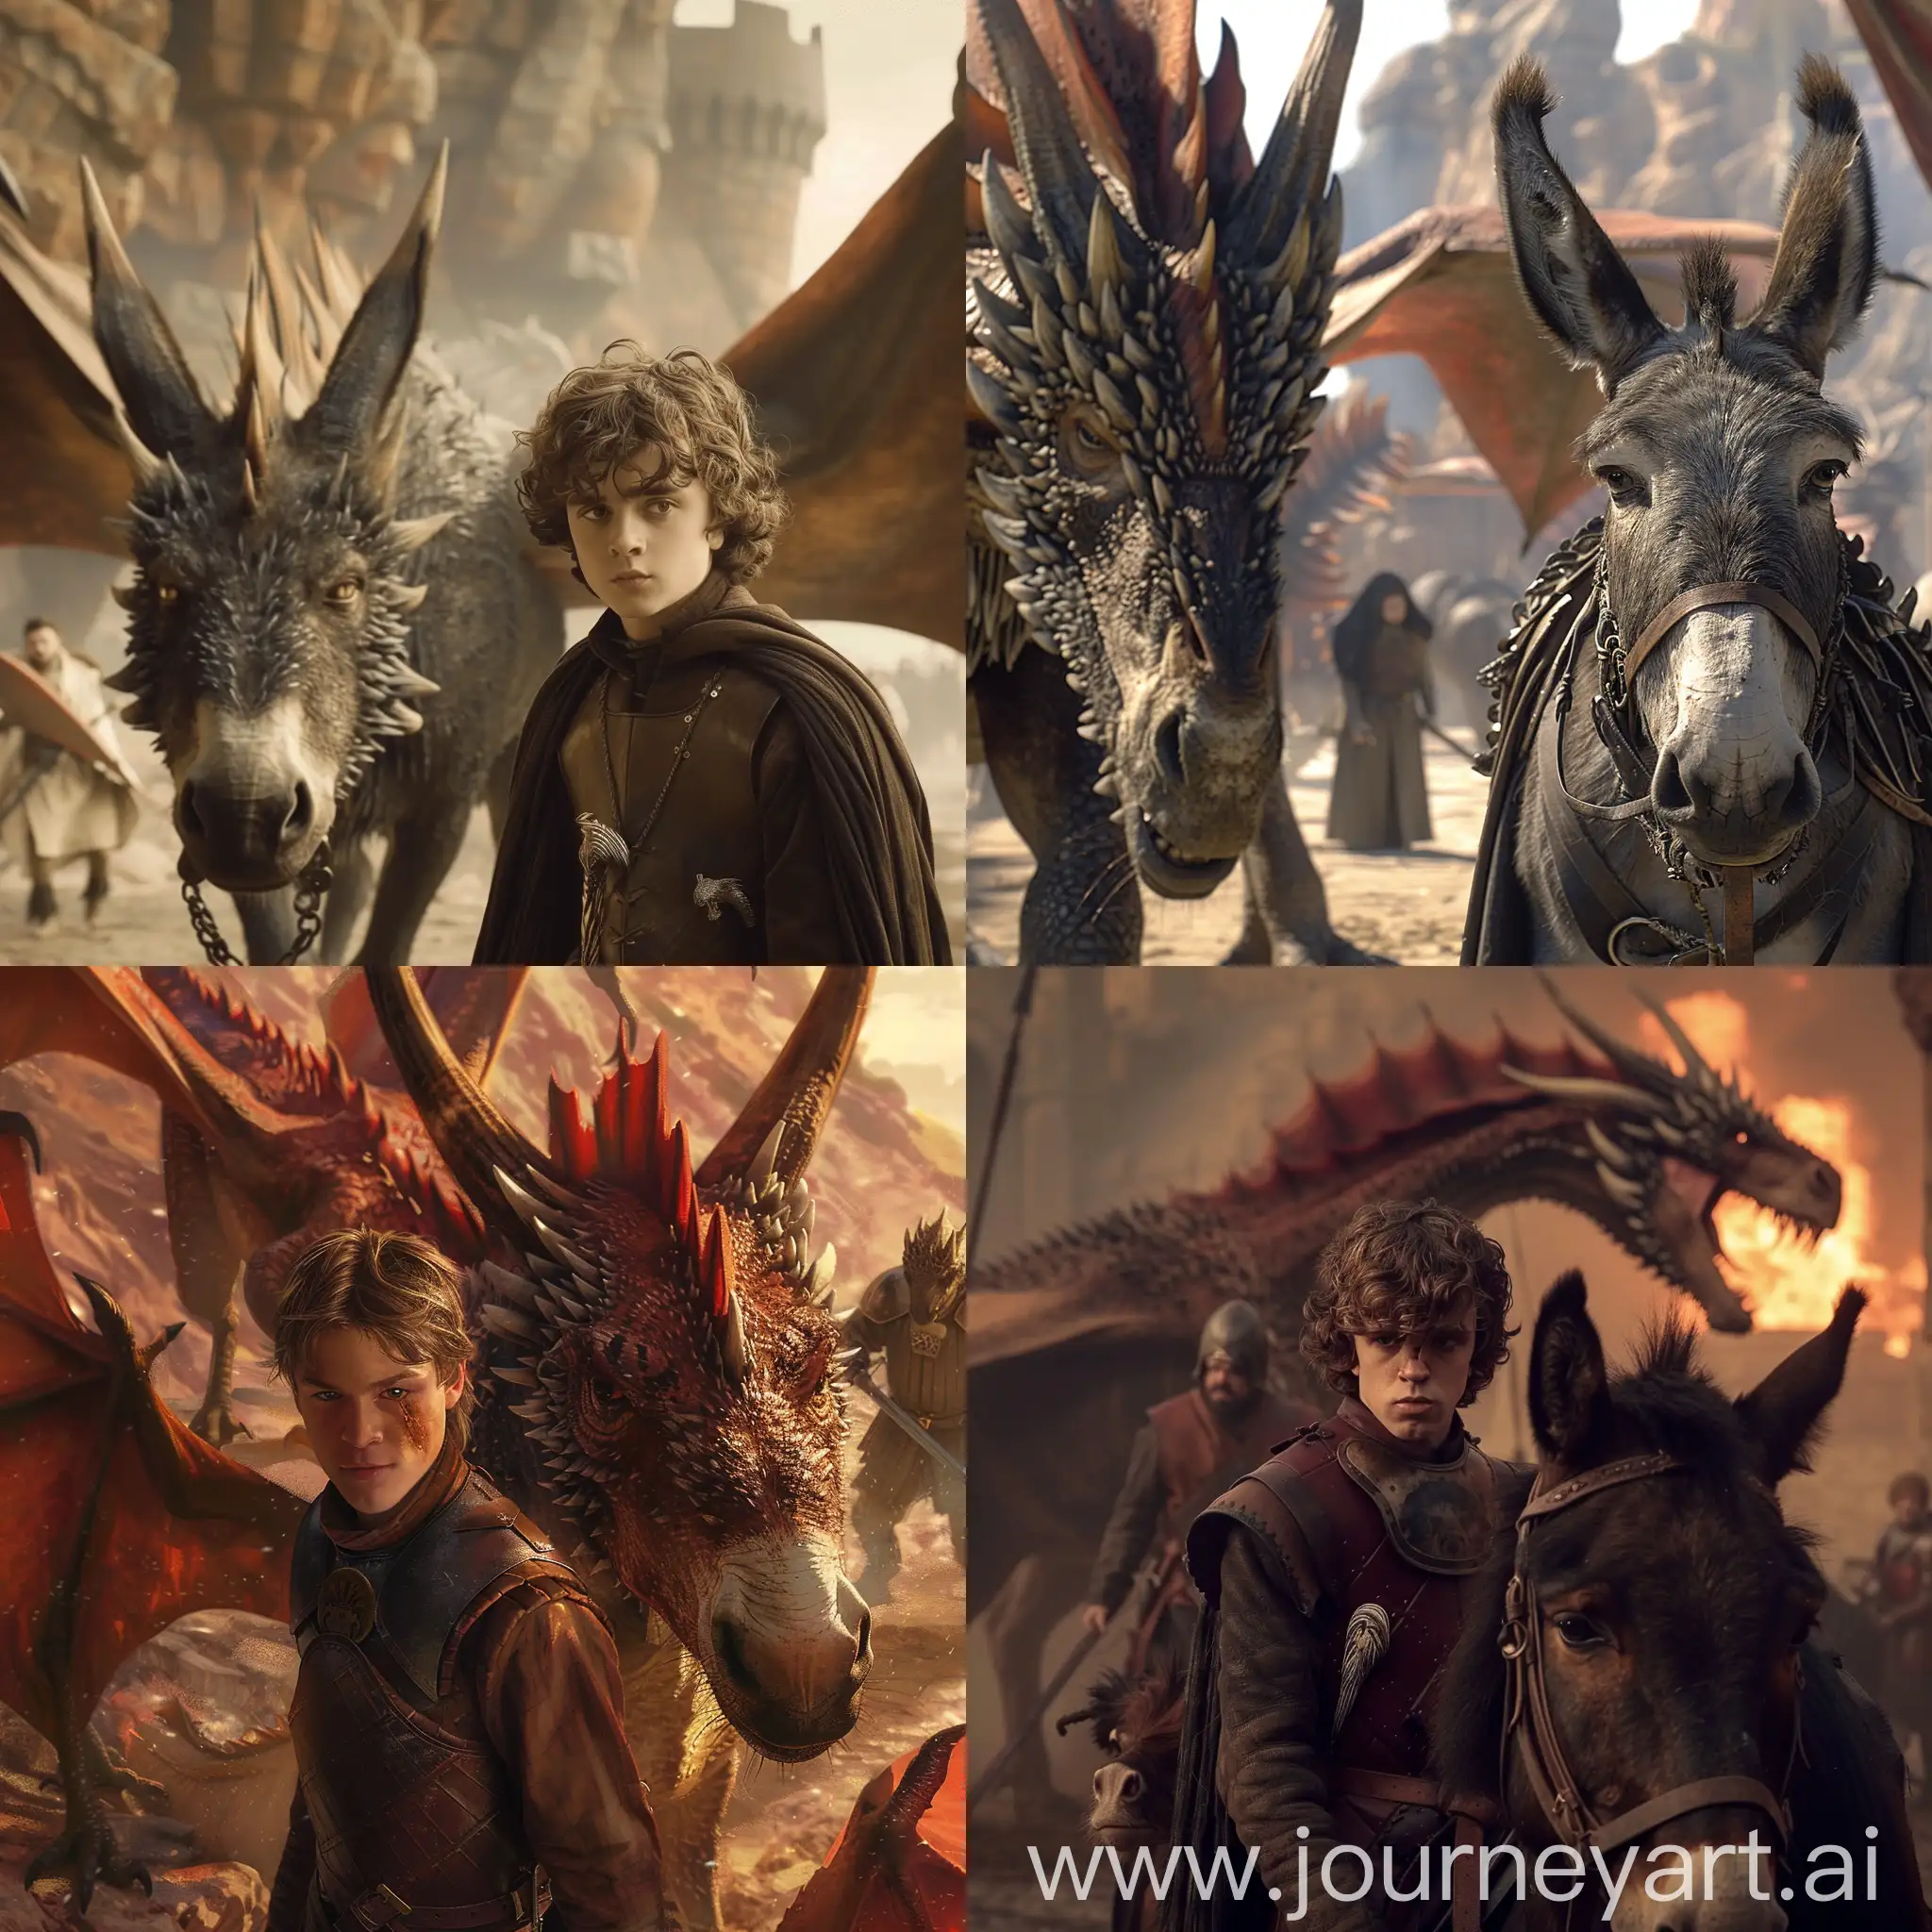 Epic-Battle-Game-of-Thrones-vs-Skyrims-Dovahkiin-and-Donkey-Against-Dragons-and-Targaryens